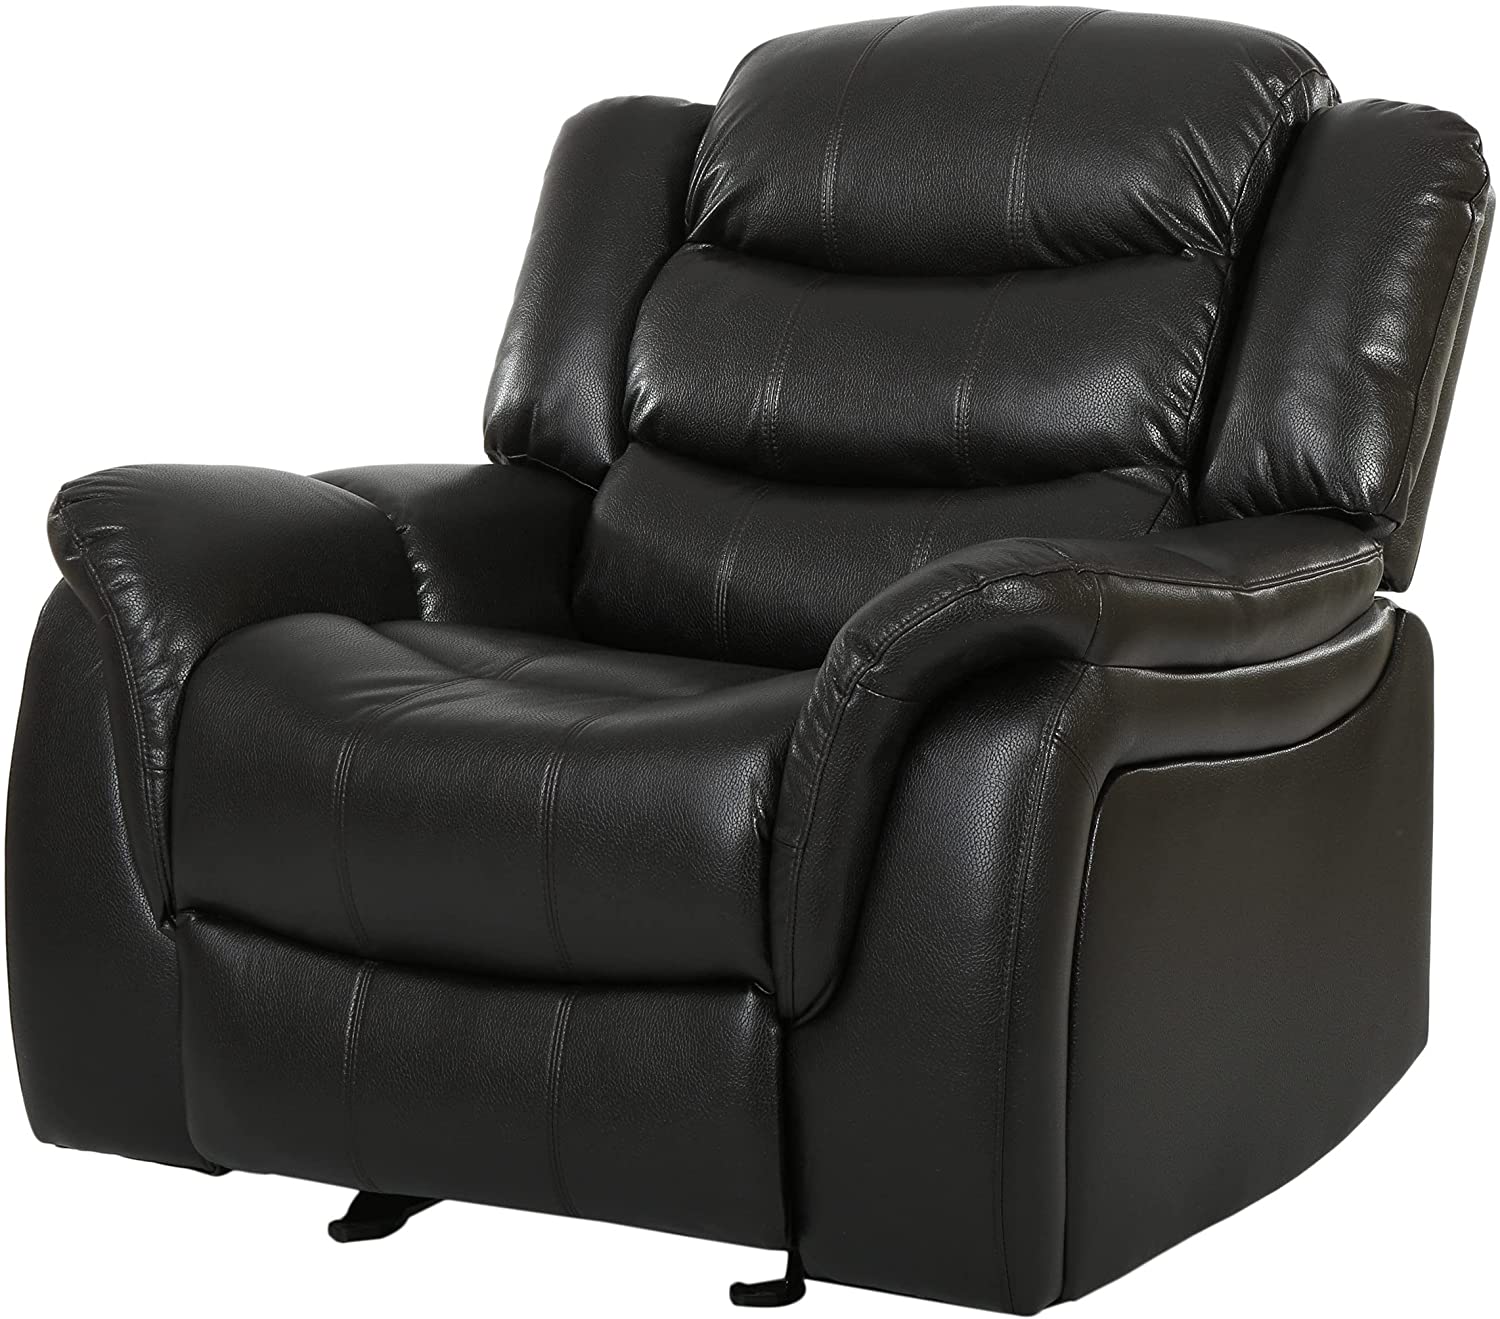 Great deal furniture leather recliner